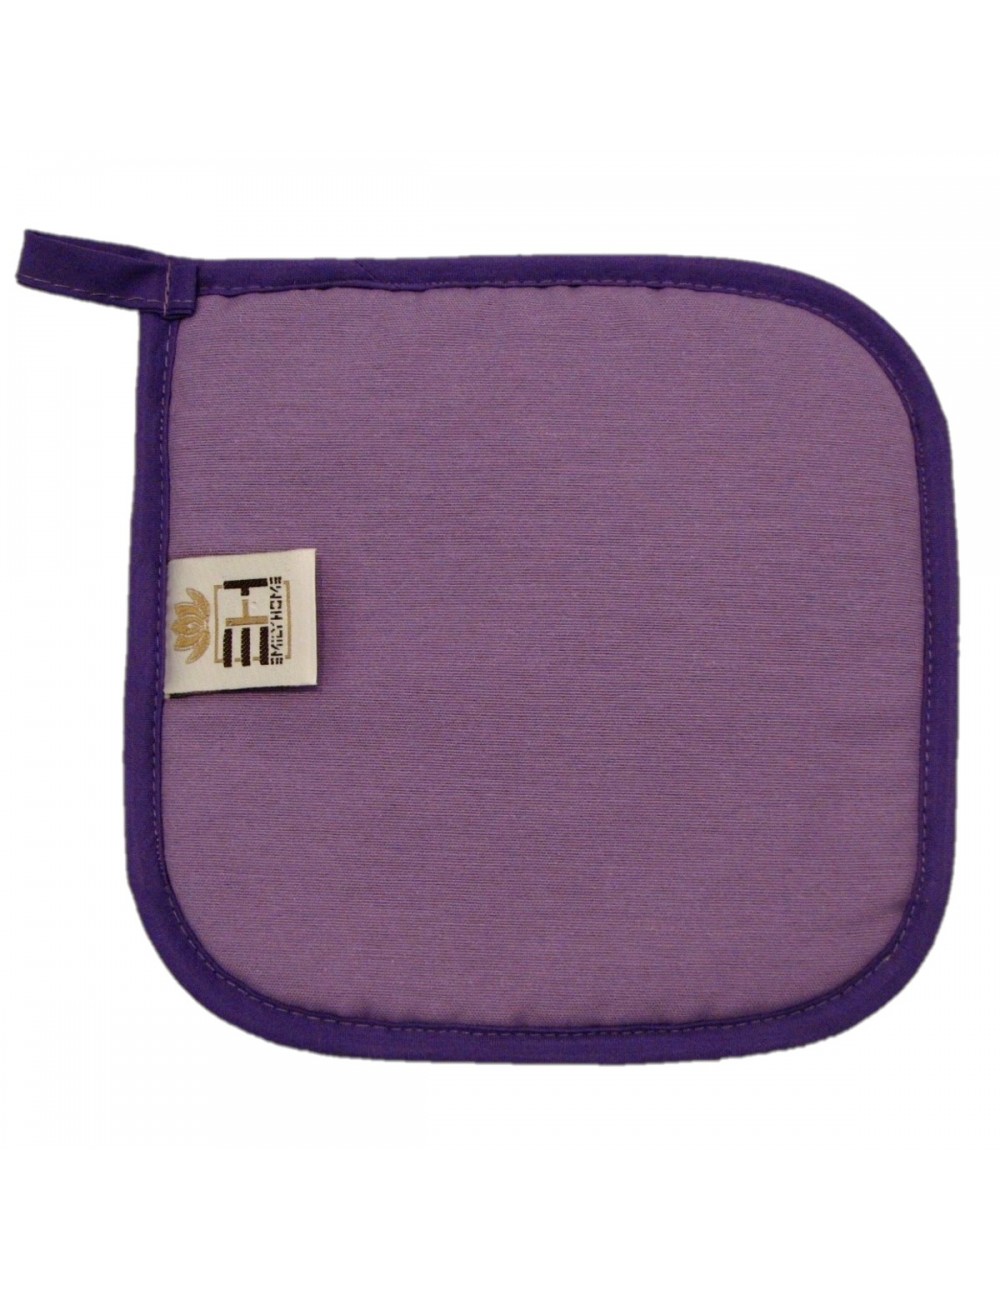 Square pot holder with...